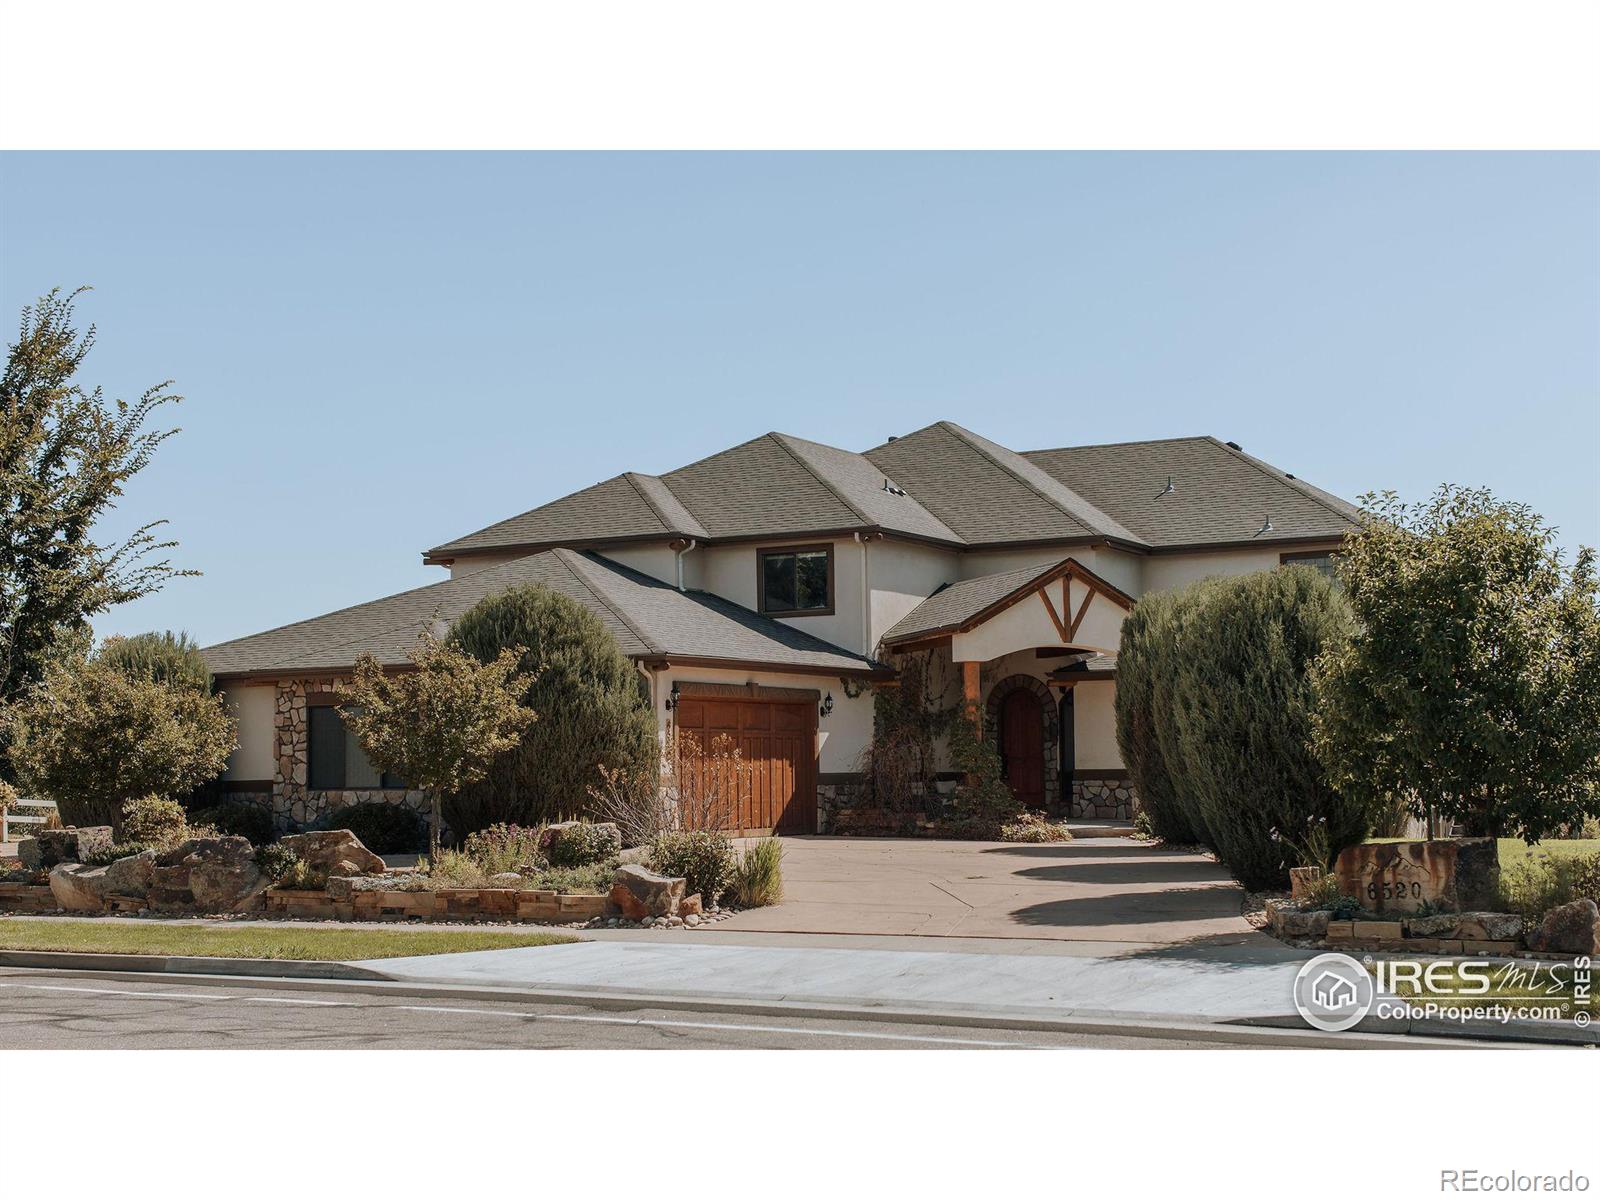 6520 E Trilby Road, fort collins MLS: 456789996942 Beds: 6 Baths: 6 Price: $1,450,000